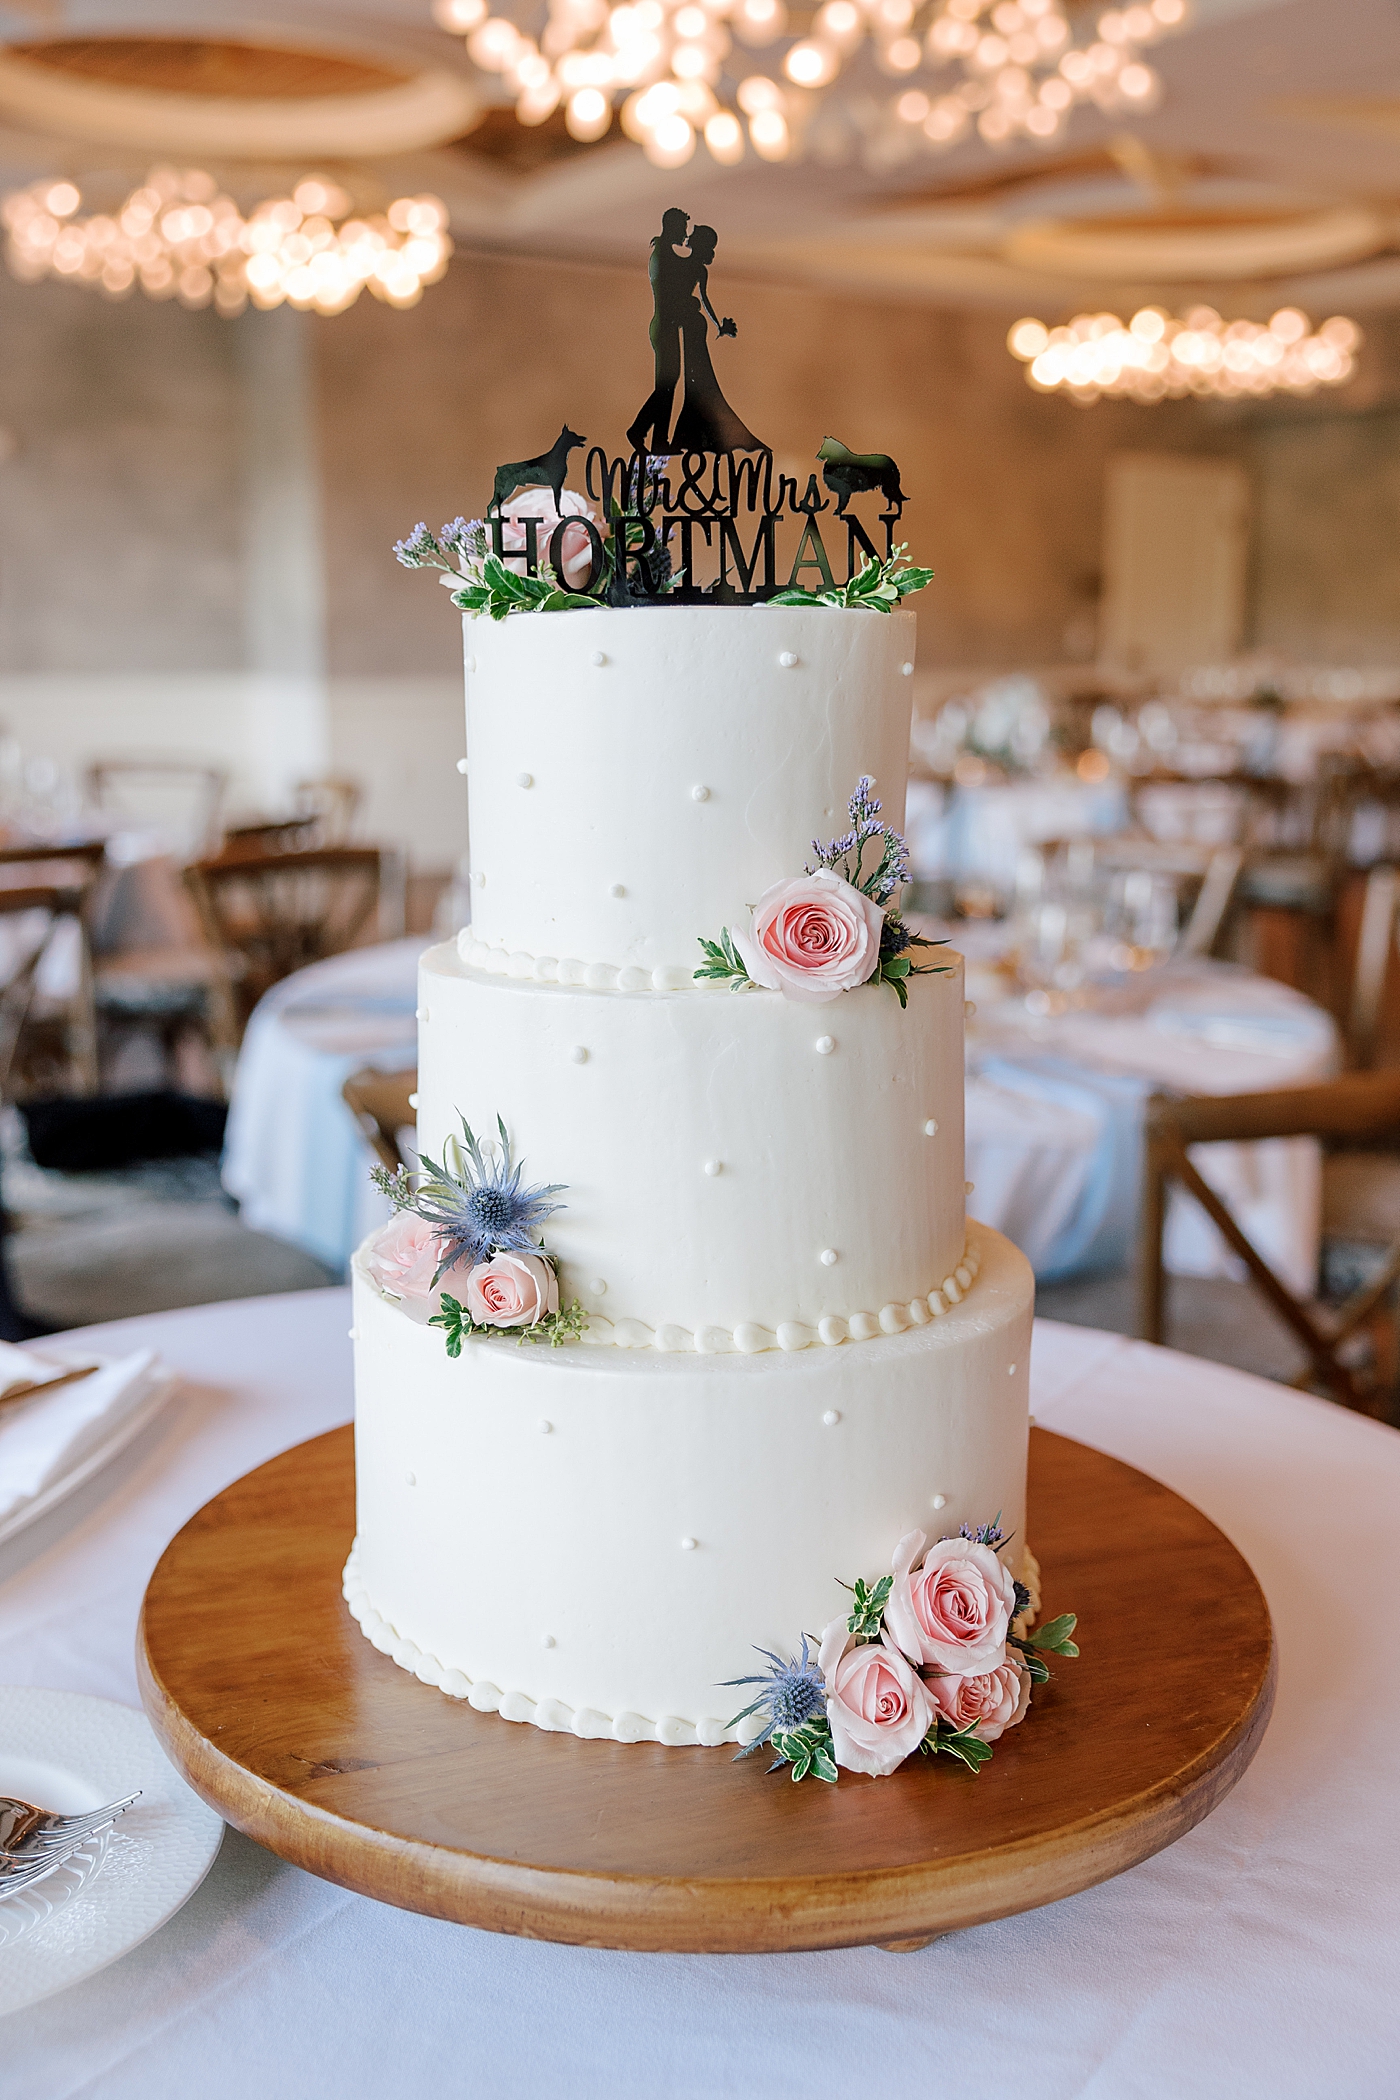 Wedding cake with polka dots and black cake topper | Image by Hope Helmuth Photography